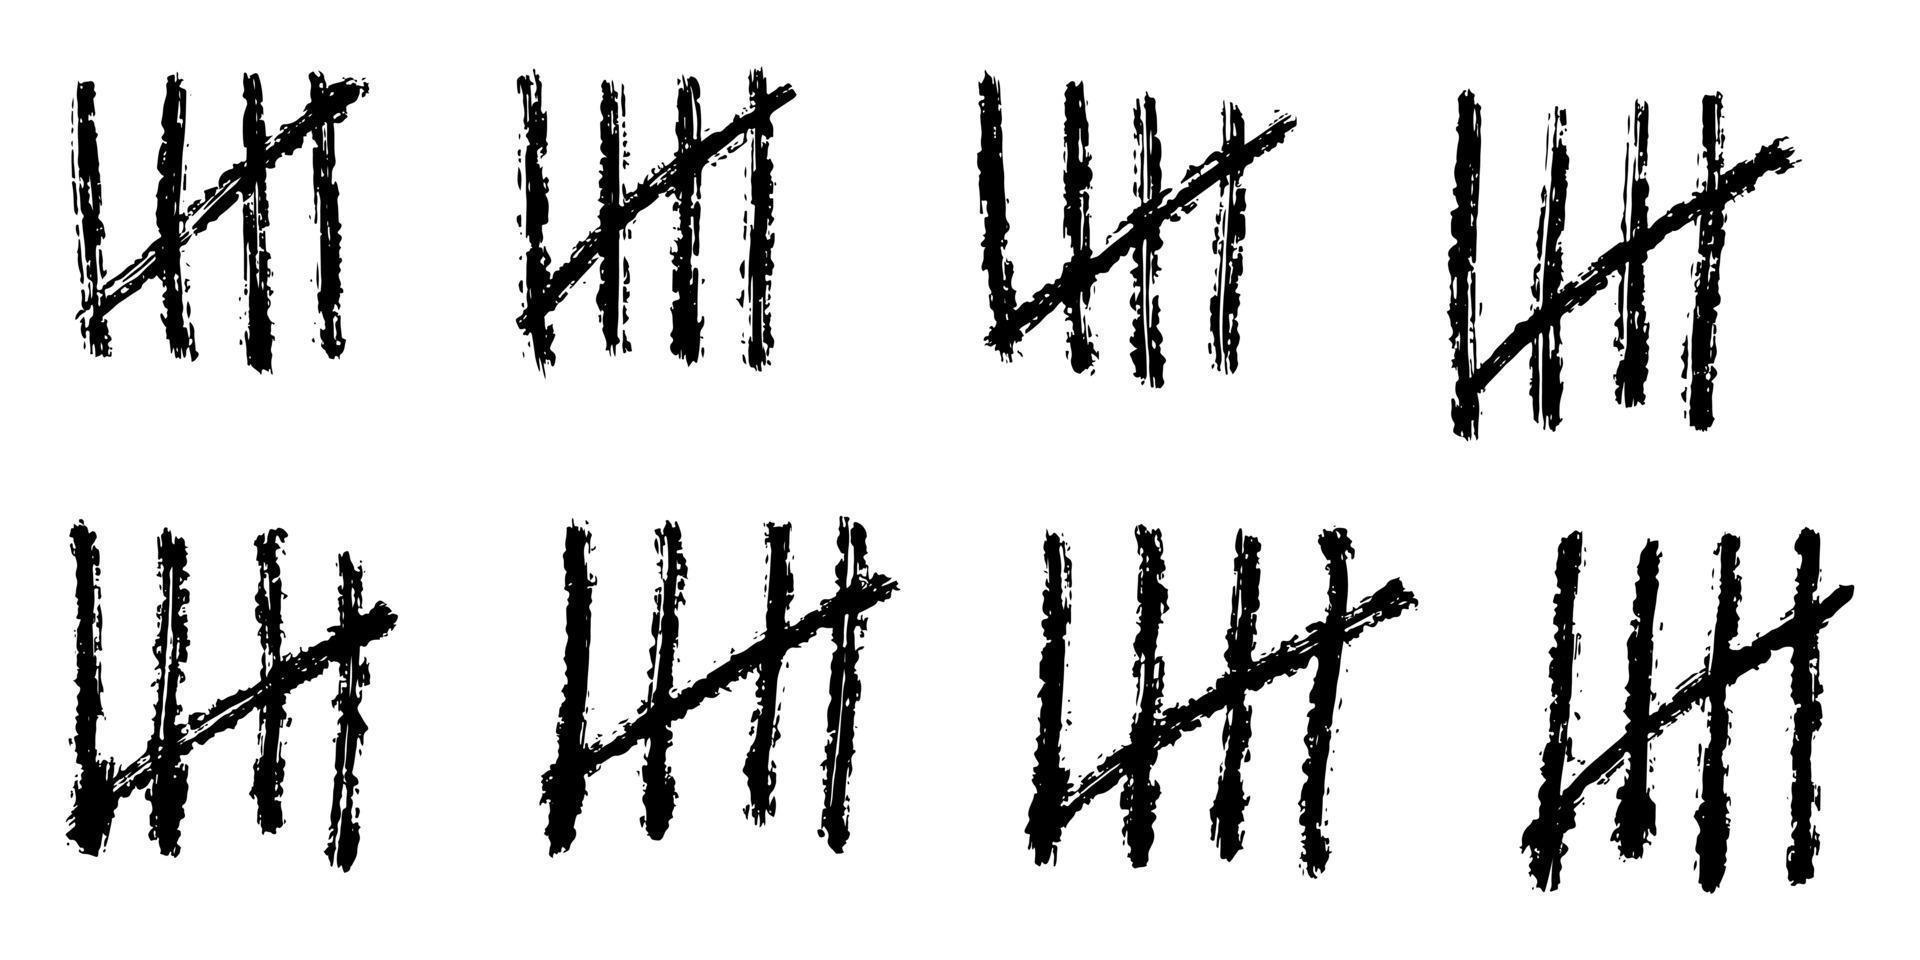 doodle Count bar. Count the days counted in slashes on the walls of a deserted island or prison. vector illustration.